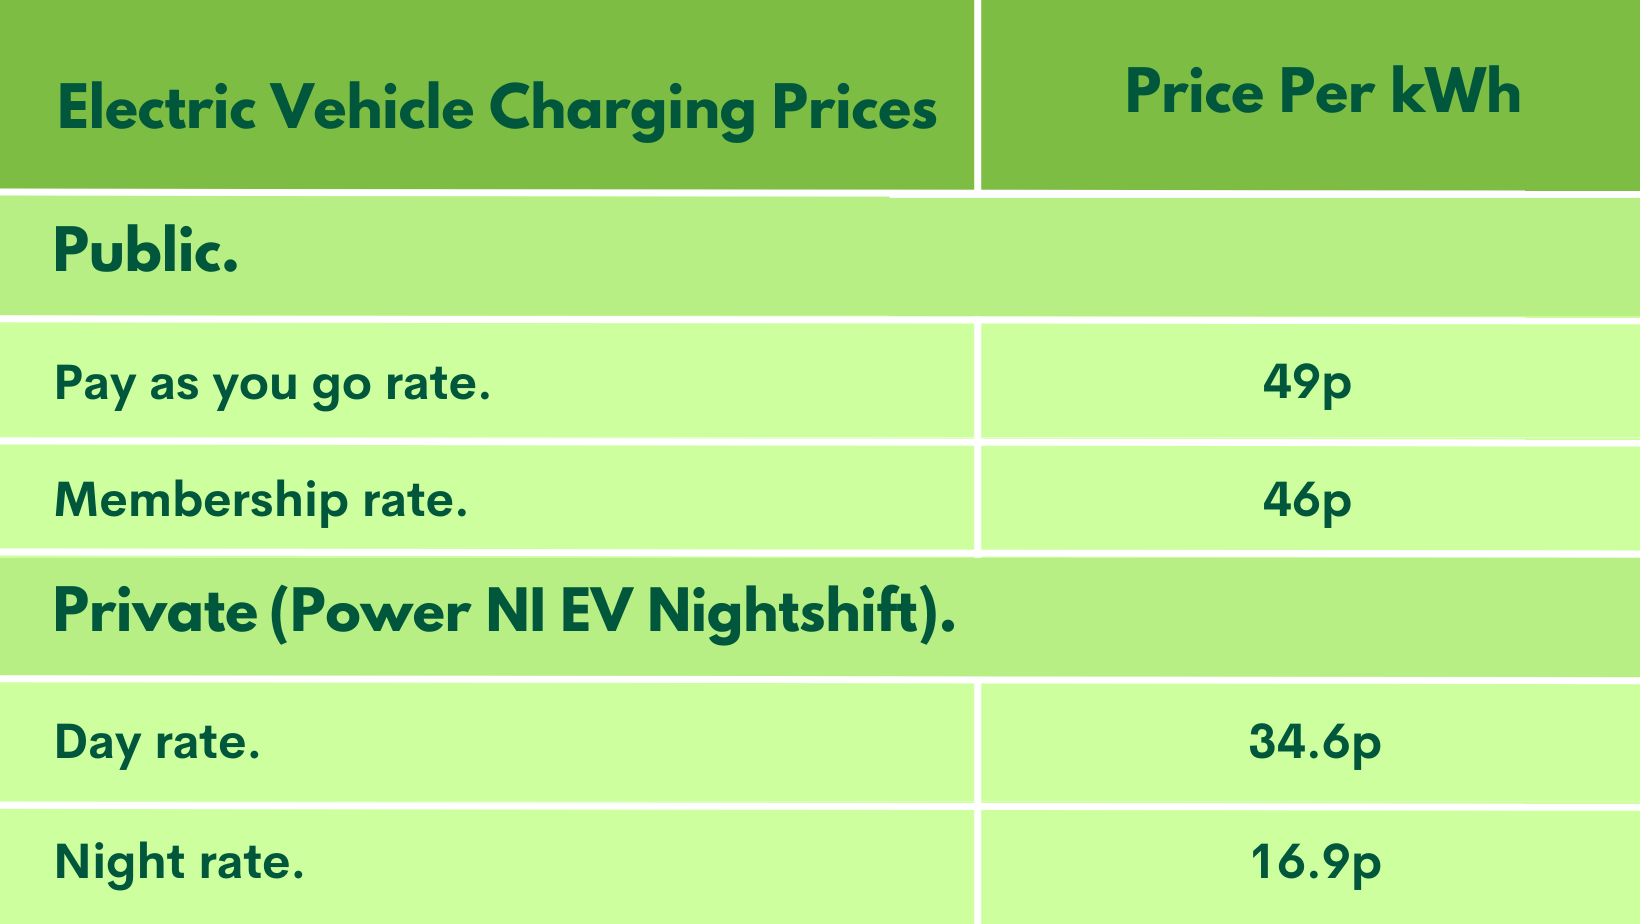 Electric Vehicle Charging prices public vs private using a reduced EV tariff. </p>
<p>Public - Pay as you go, 49p per kWh or membership rate, 46p per kWh.</p>
<p>Private using Power NI EV Nightshift tariff - Day rate, 34.6p per kWh or Night rate, 16.9p per kWh.